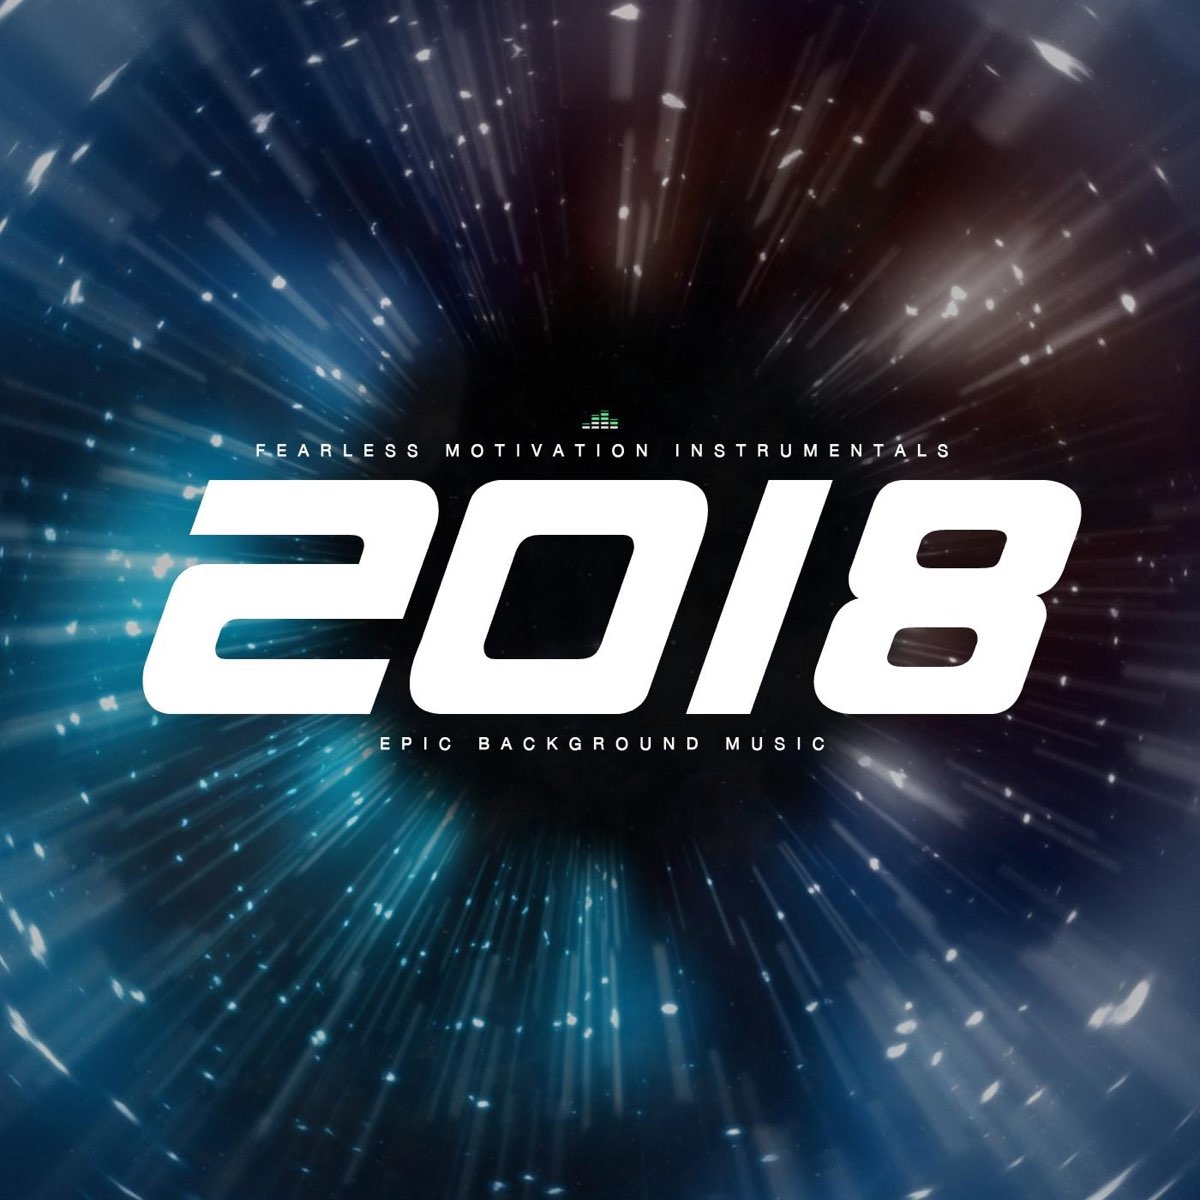 2018 (Epic Background Music) - Single - Album by Fearless Motivation  Instrumentals - Apple Music